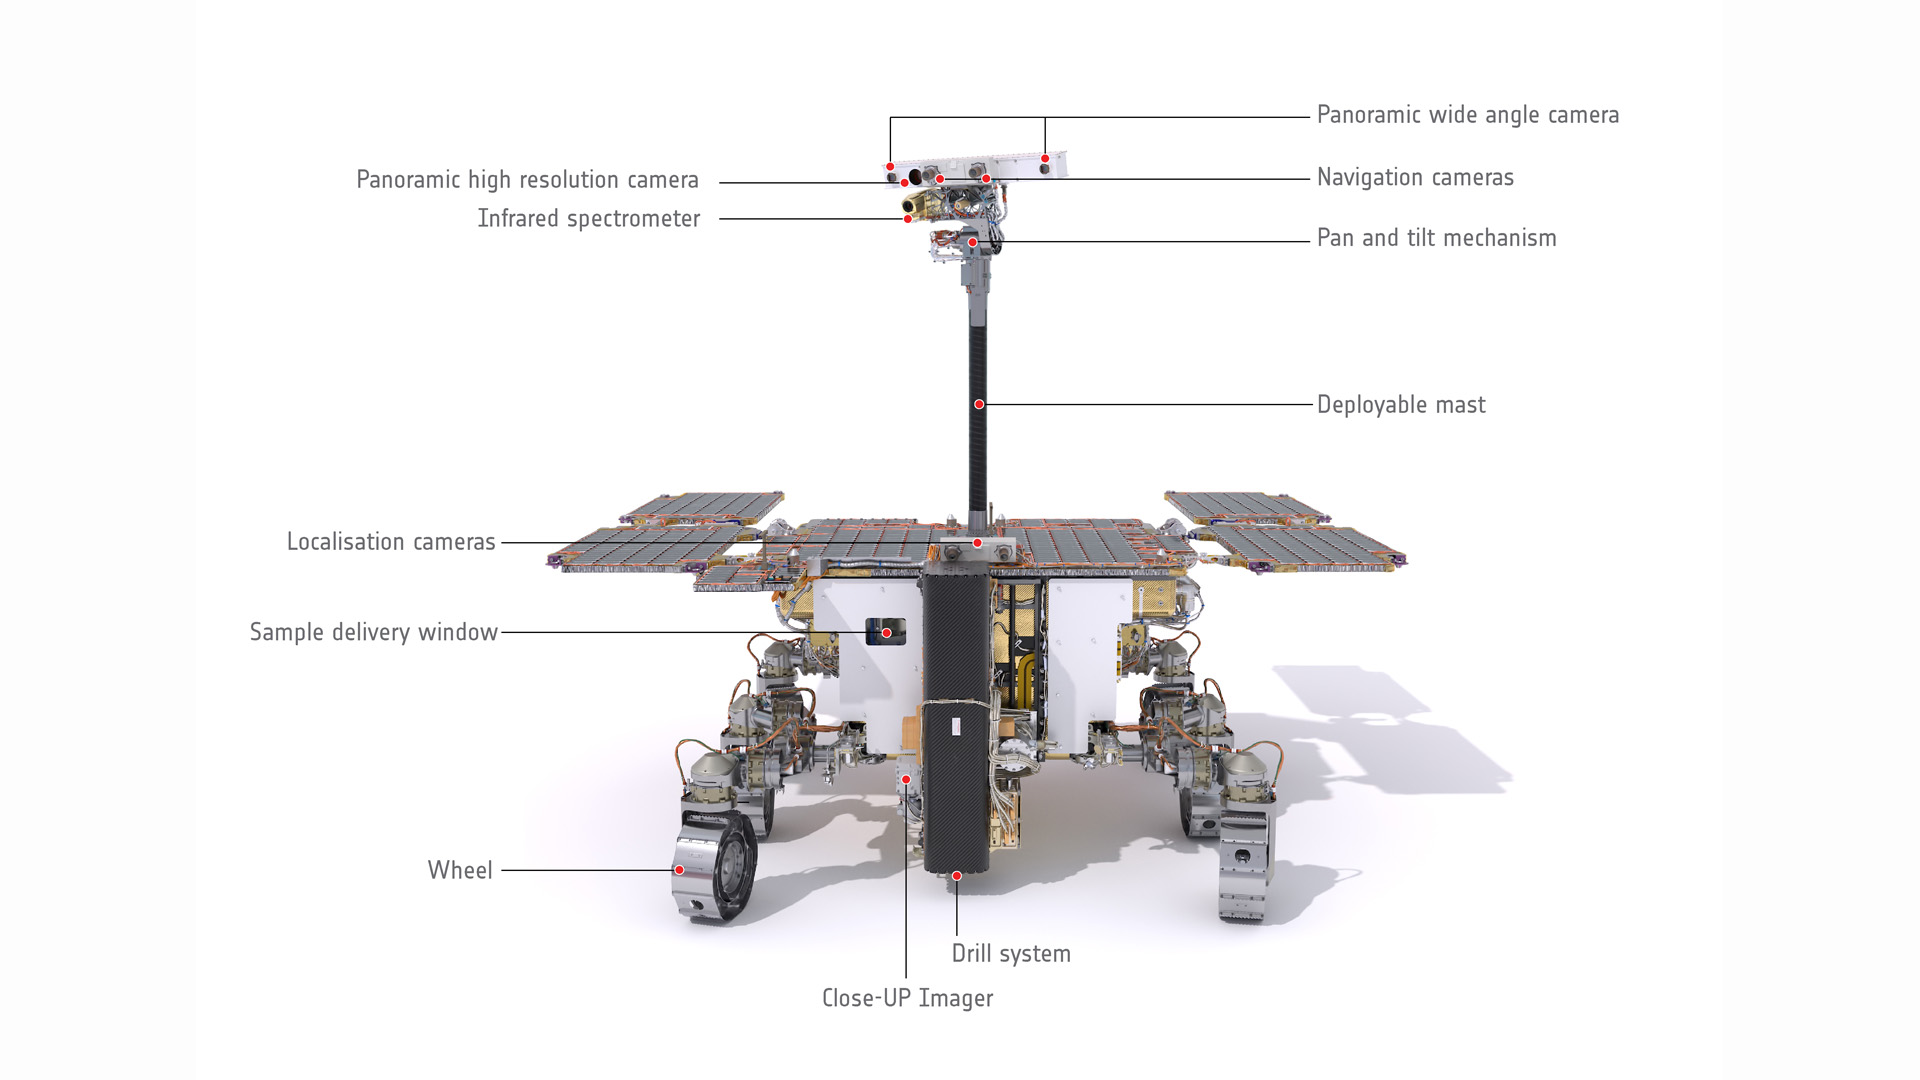 The European ExoMars rover carries a suite of instruments designed to find traces of life in Martian soil.